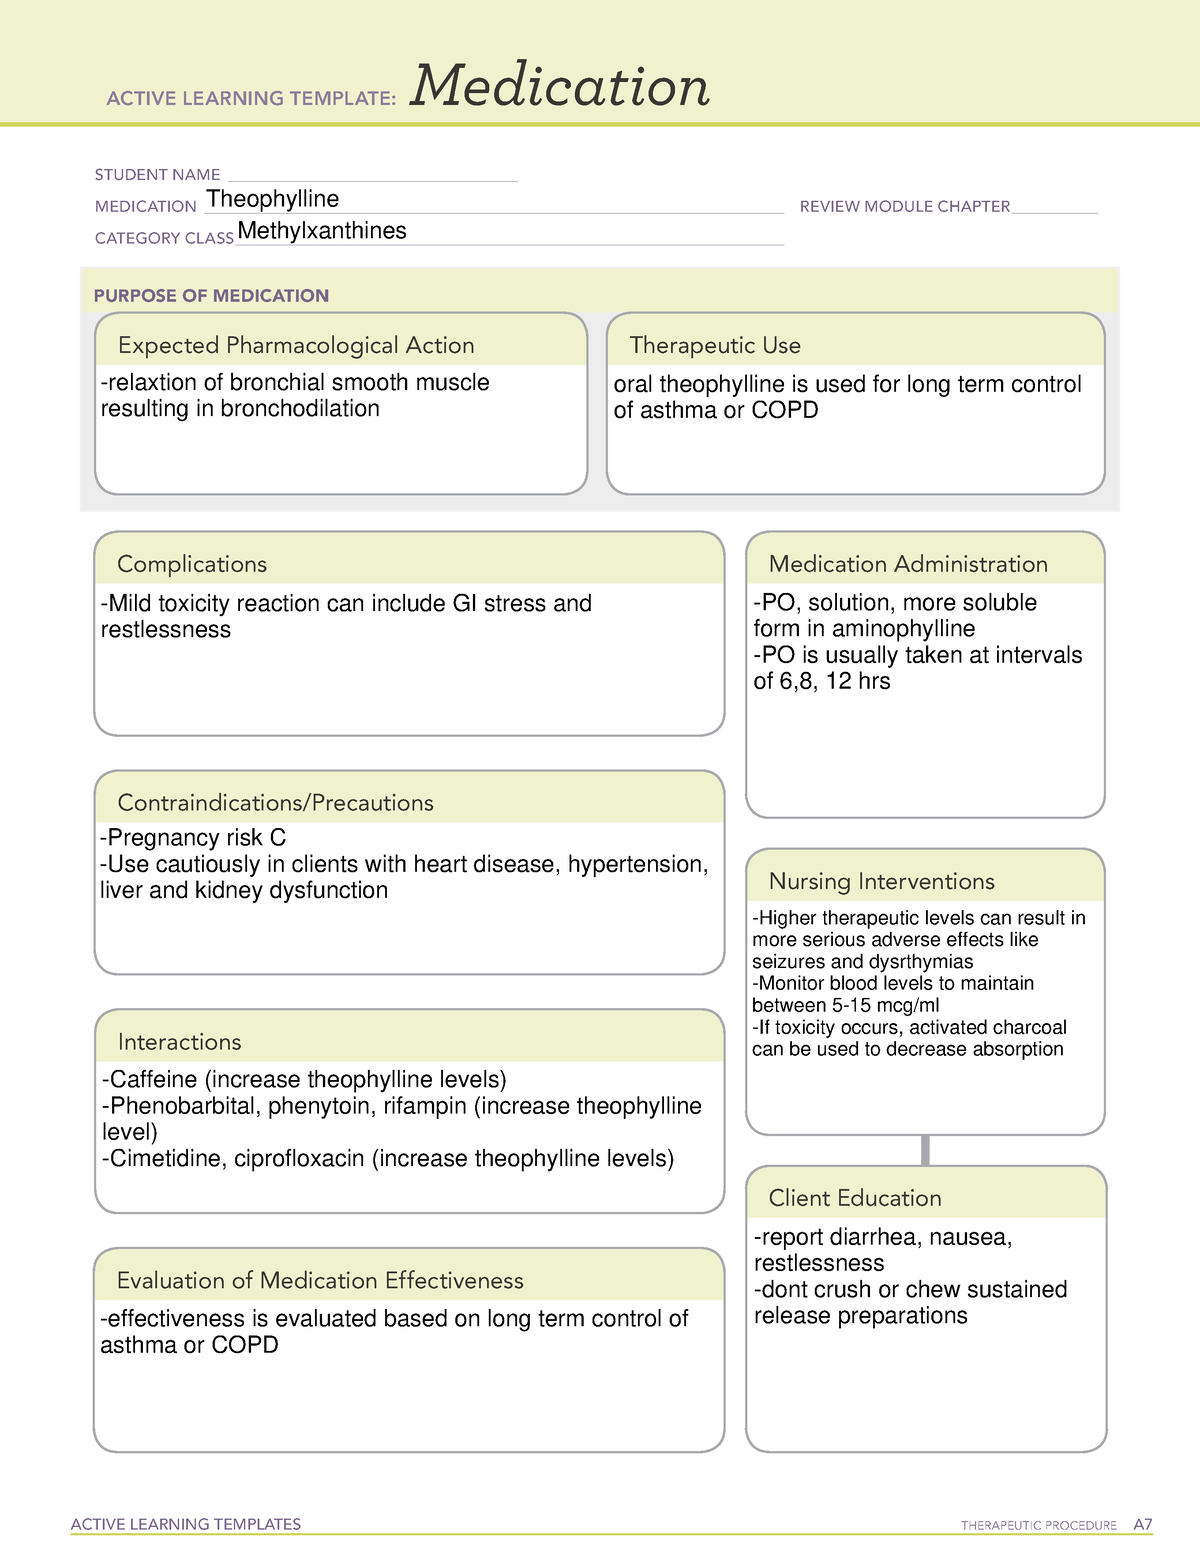 medication-theophylline-active-learning-templates-therapeutic